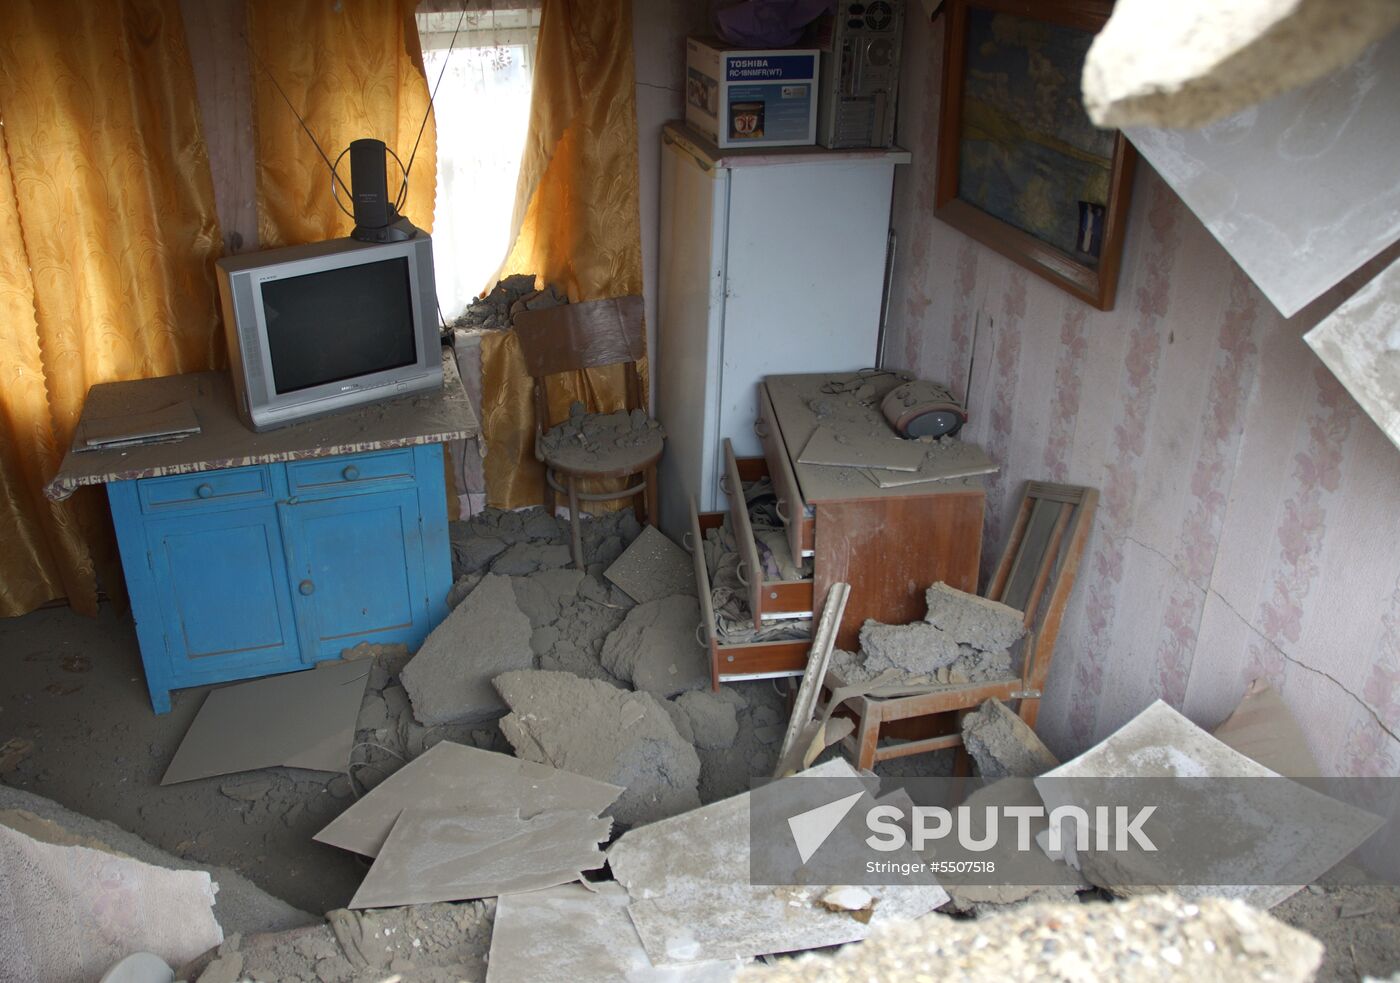 Aftermath of shelling of residential areas in Donbass by Ukrainian armed forces